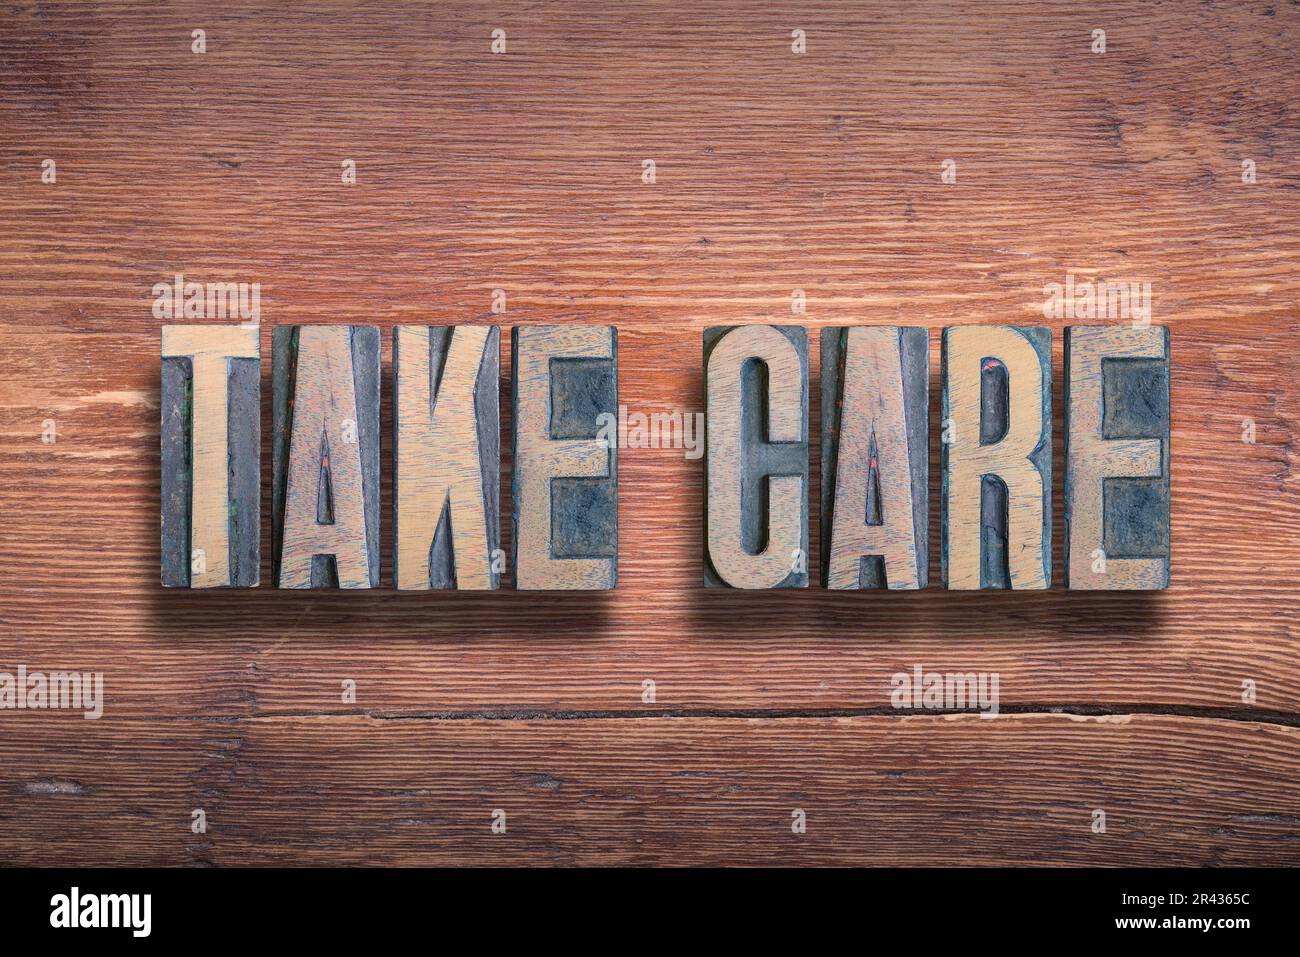 take care phrase combined on vintage varnished wooden surface Stock Photo